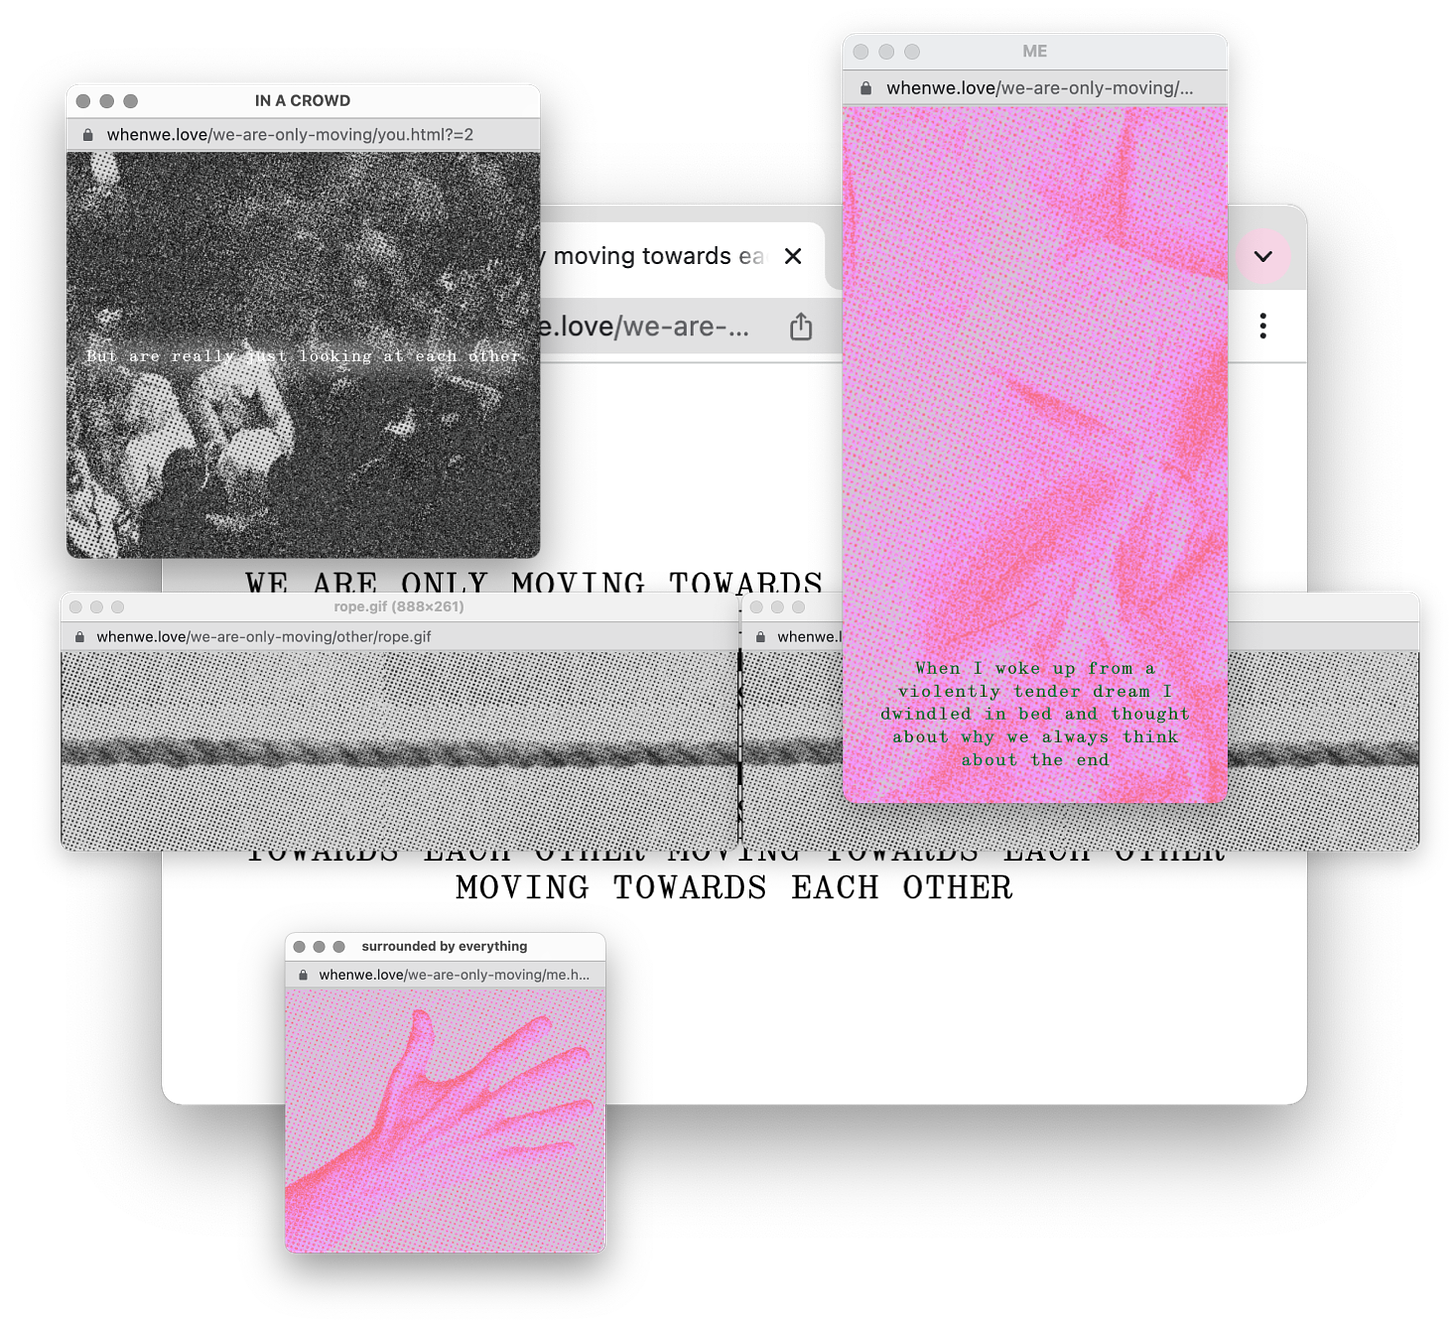 a series of overlapping browser windows, including a pink hand, a rope, and the text "when i woke up from a violently tender dream I dwindled in bed and thought about why we always think about the end"